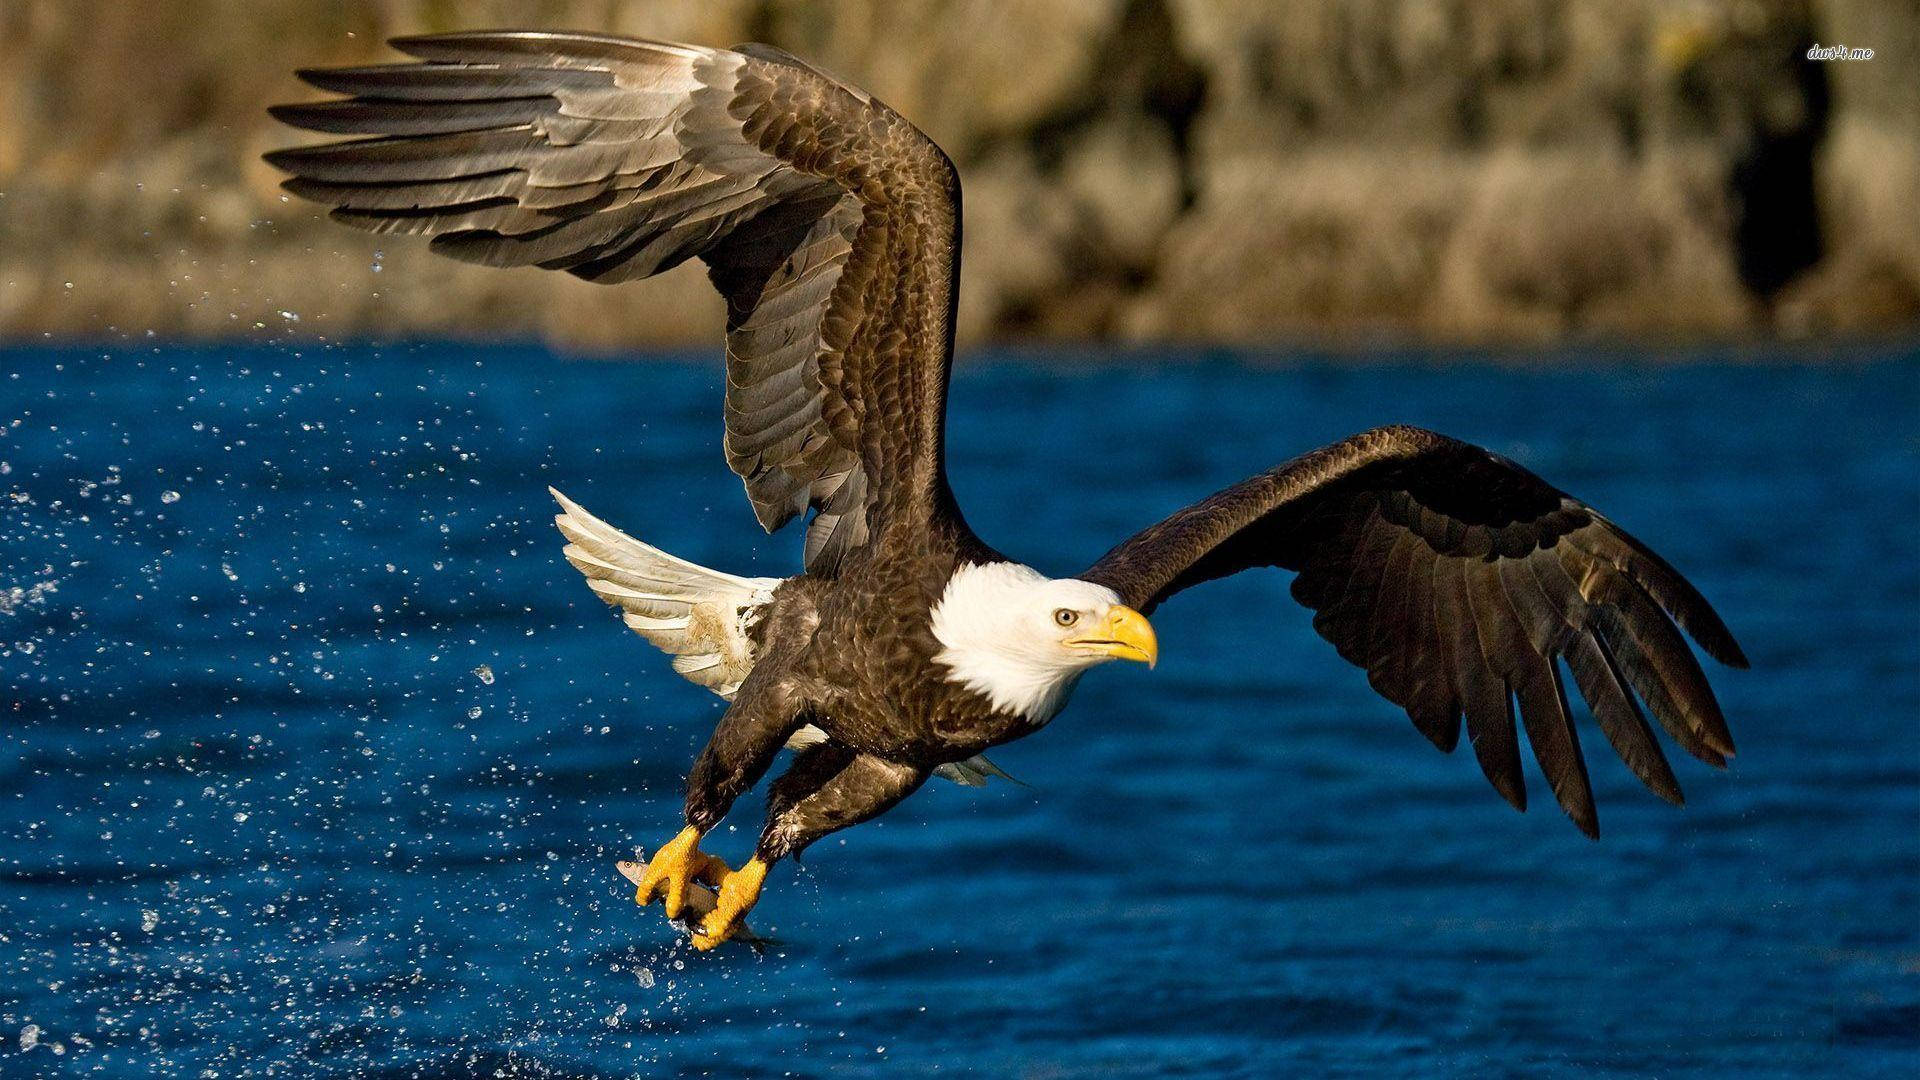 Us Eagle Glide On Water